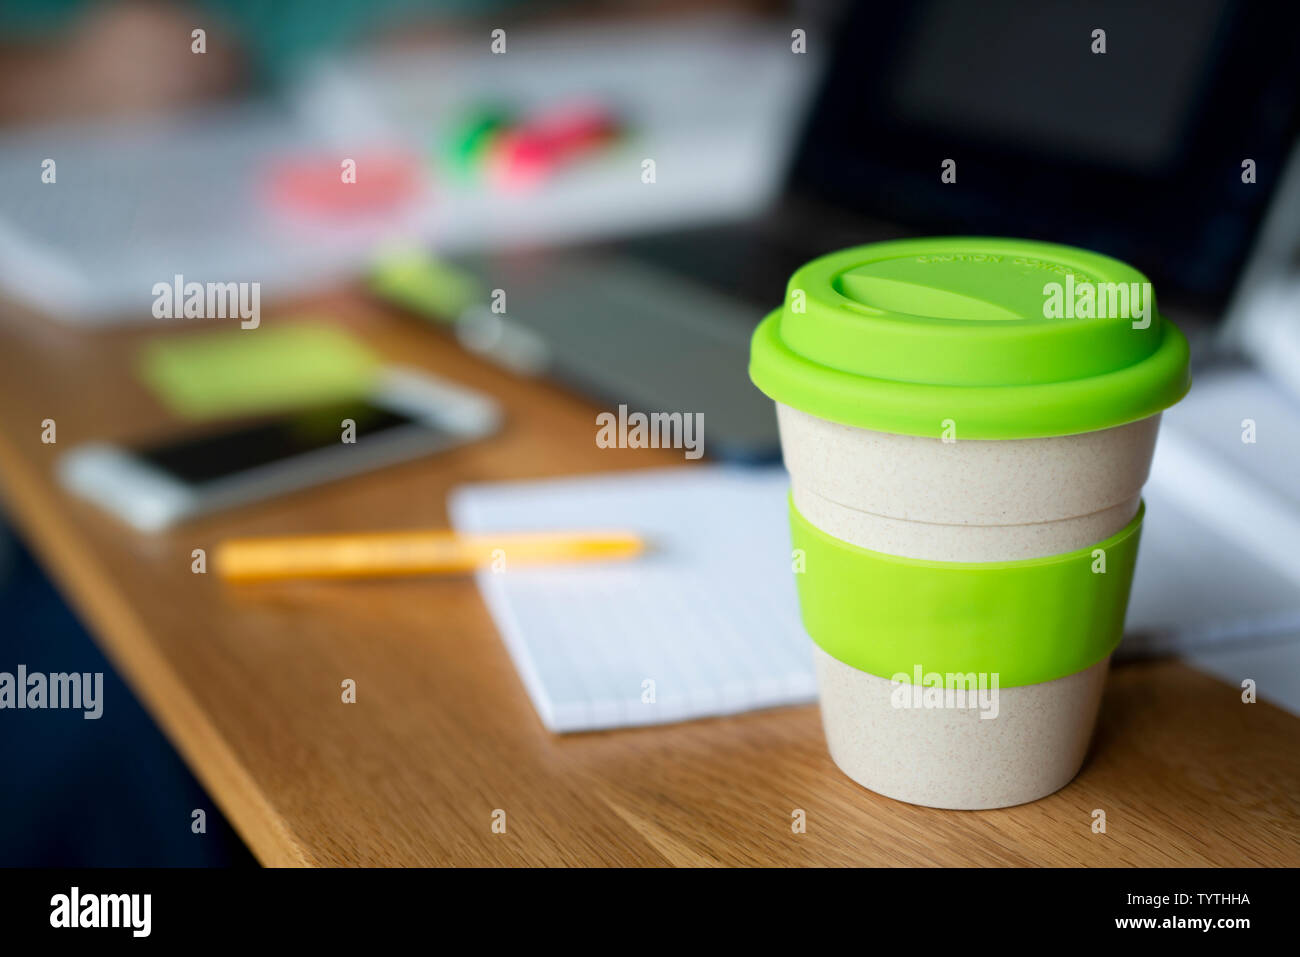 https://c8.alamy.com/comp/TYTHHA/a-bamboo-reusable-coffee-cup-sits-on-a-wooden-table-along-with-other-items-such-as-text-books-and-a-laptop-which-suggests-its-somebodys-study-space-TYTHHA.jpg